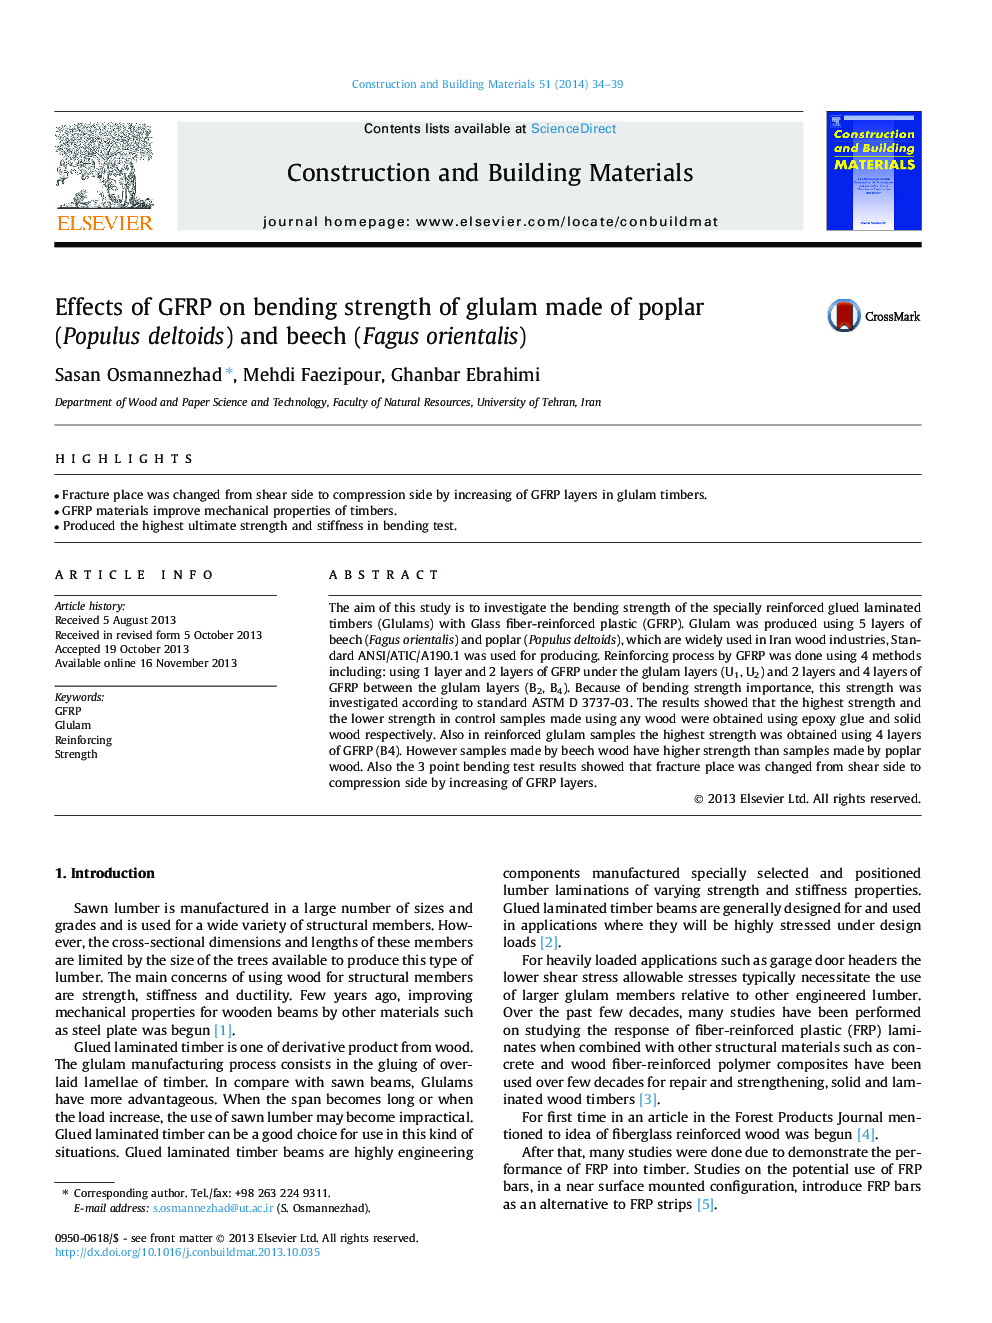 Effects of GFRP on bending strength of glulam made of poplar (Populus deltoids) and beech (Fagusorientalis)